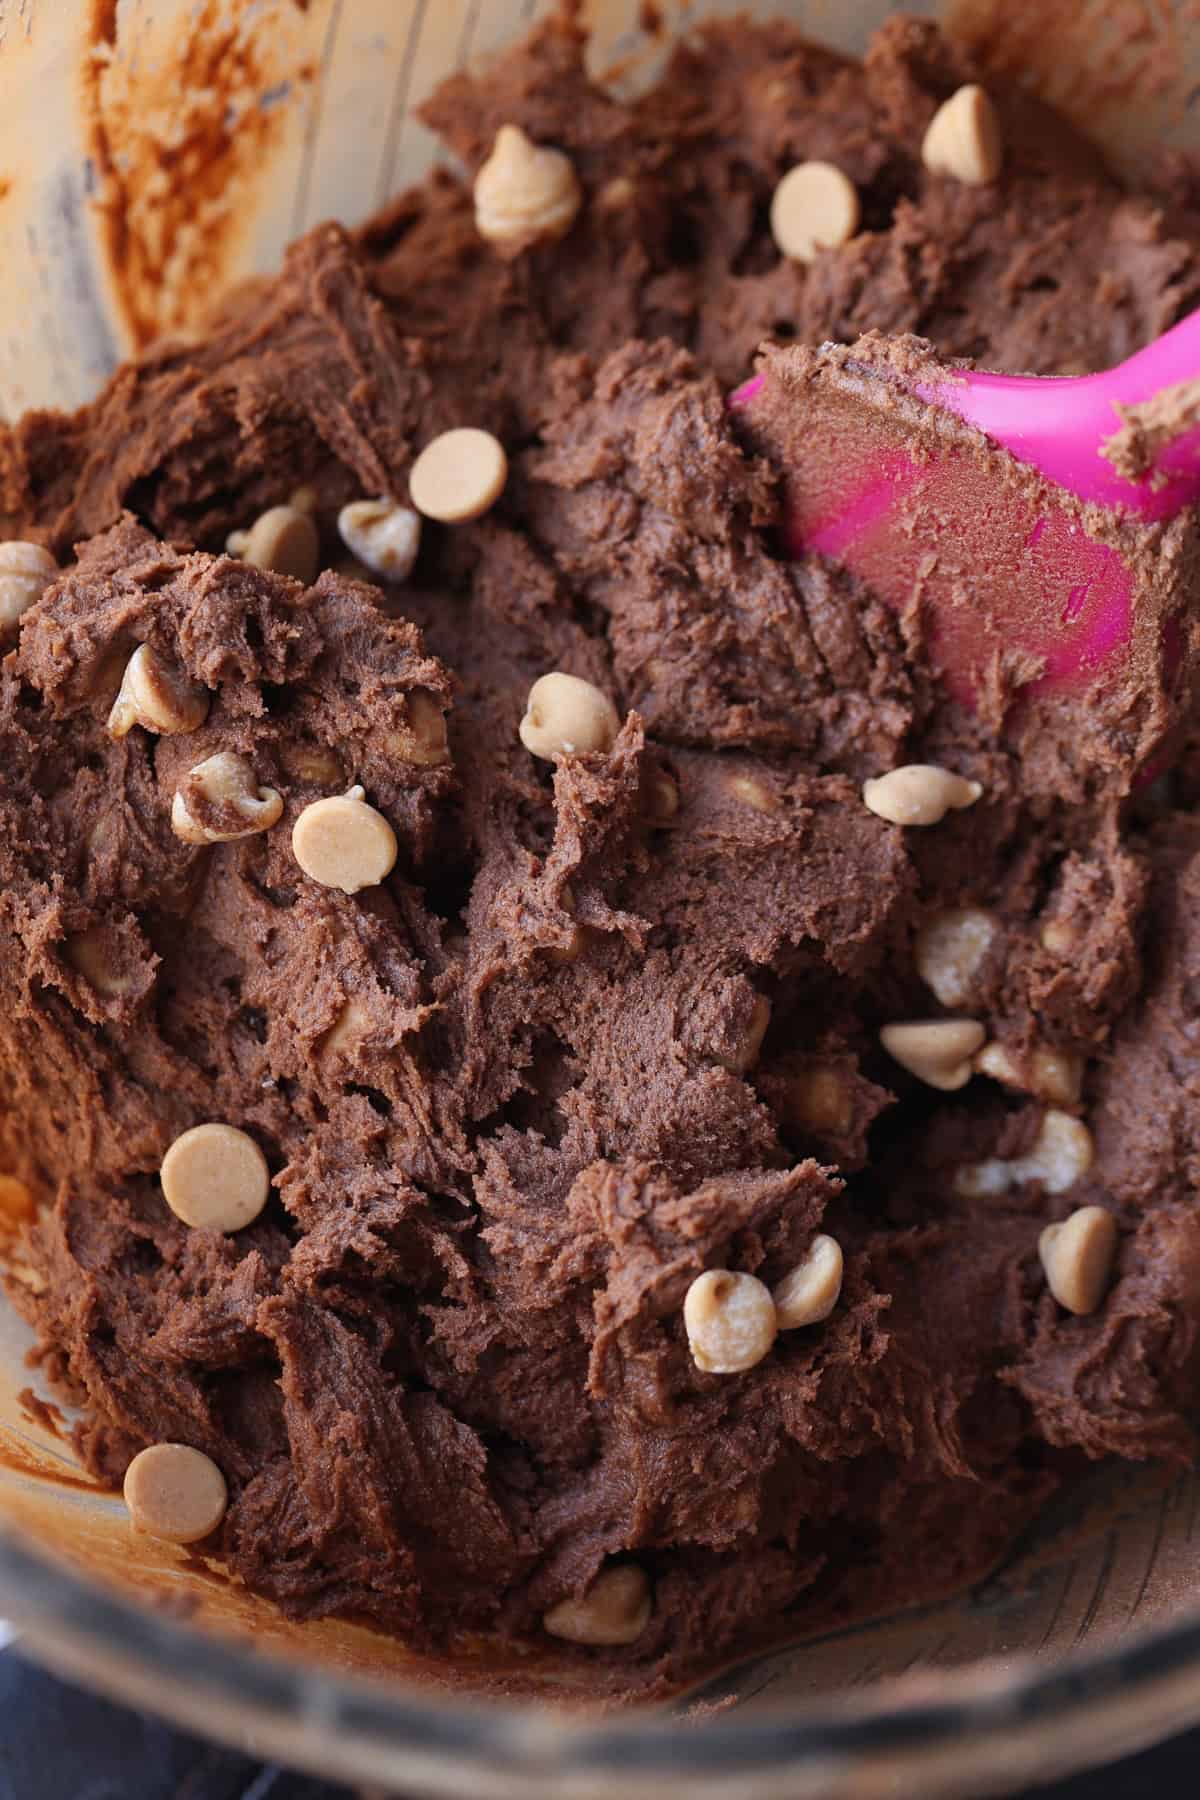 Chocolate cookie dough with peanut butter chips in a mixing bowl with a pink rubber spatula